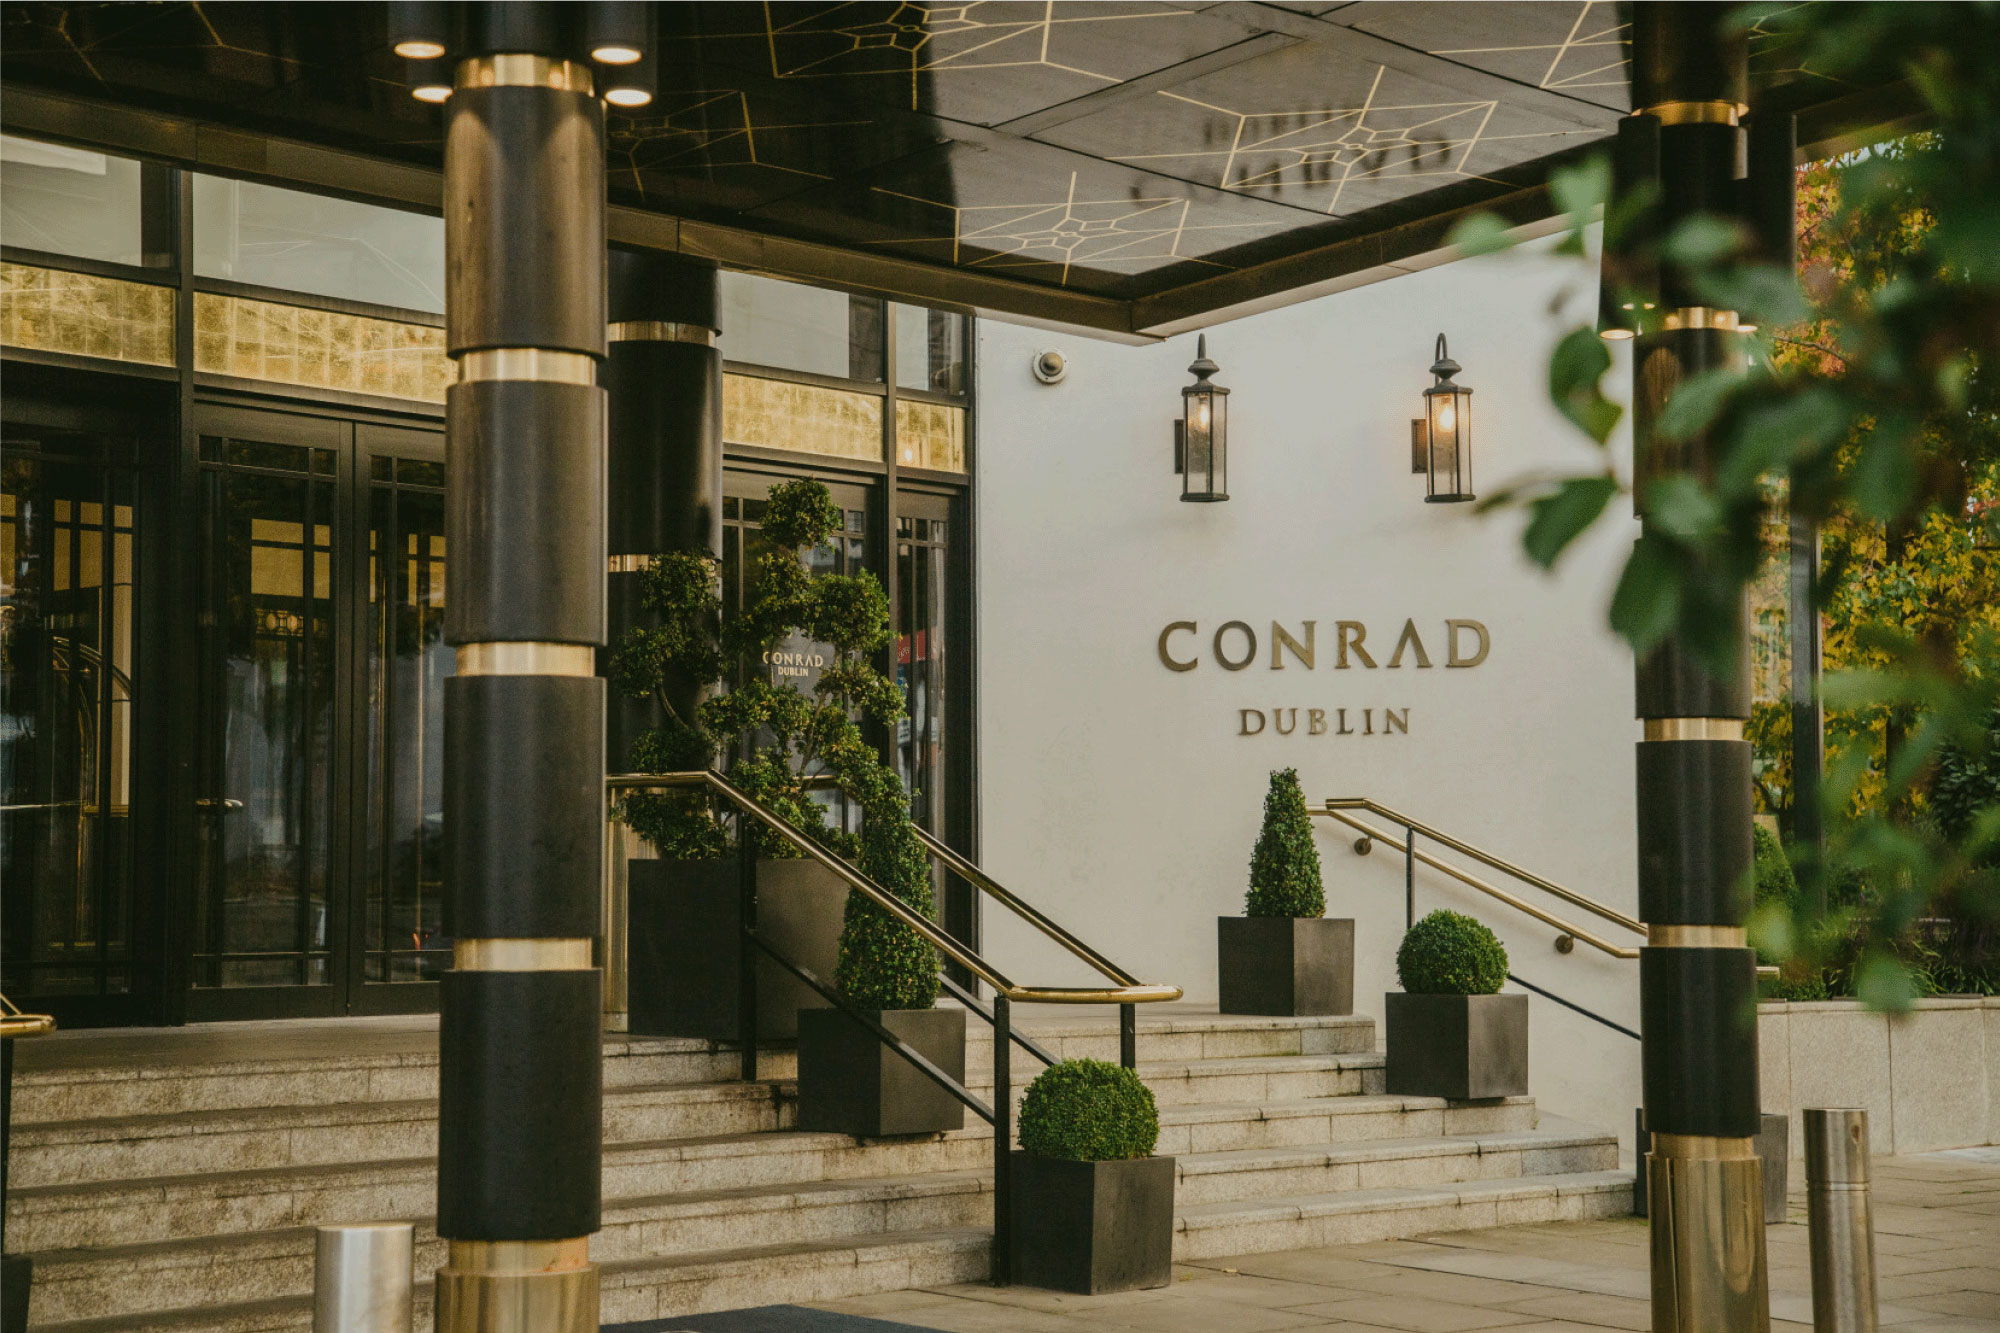 The Annual Meeting will take place at the Conrad Dublin in September